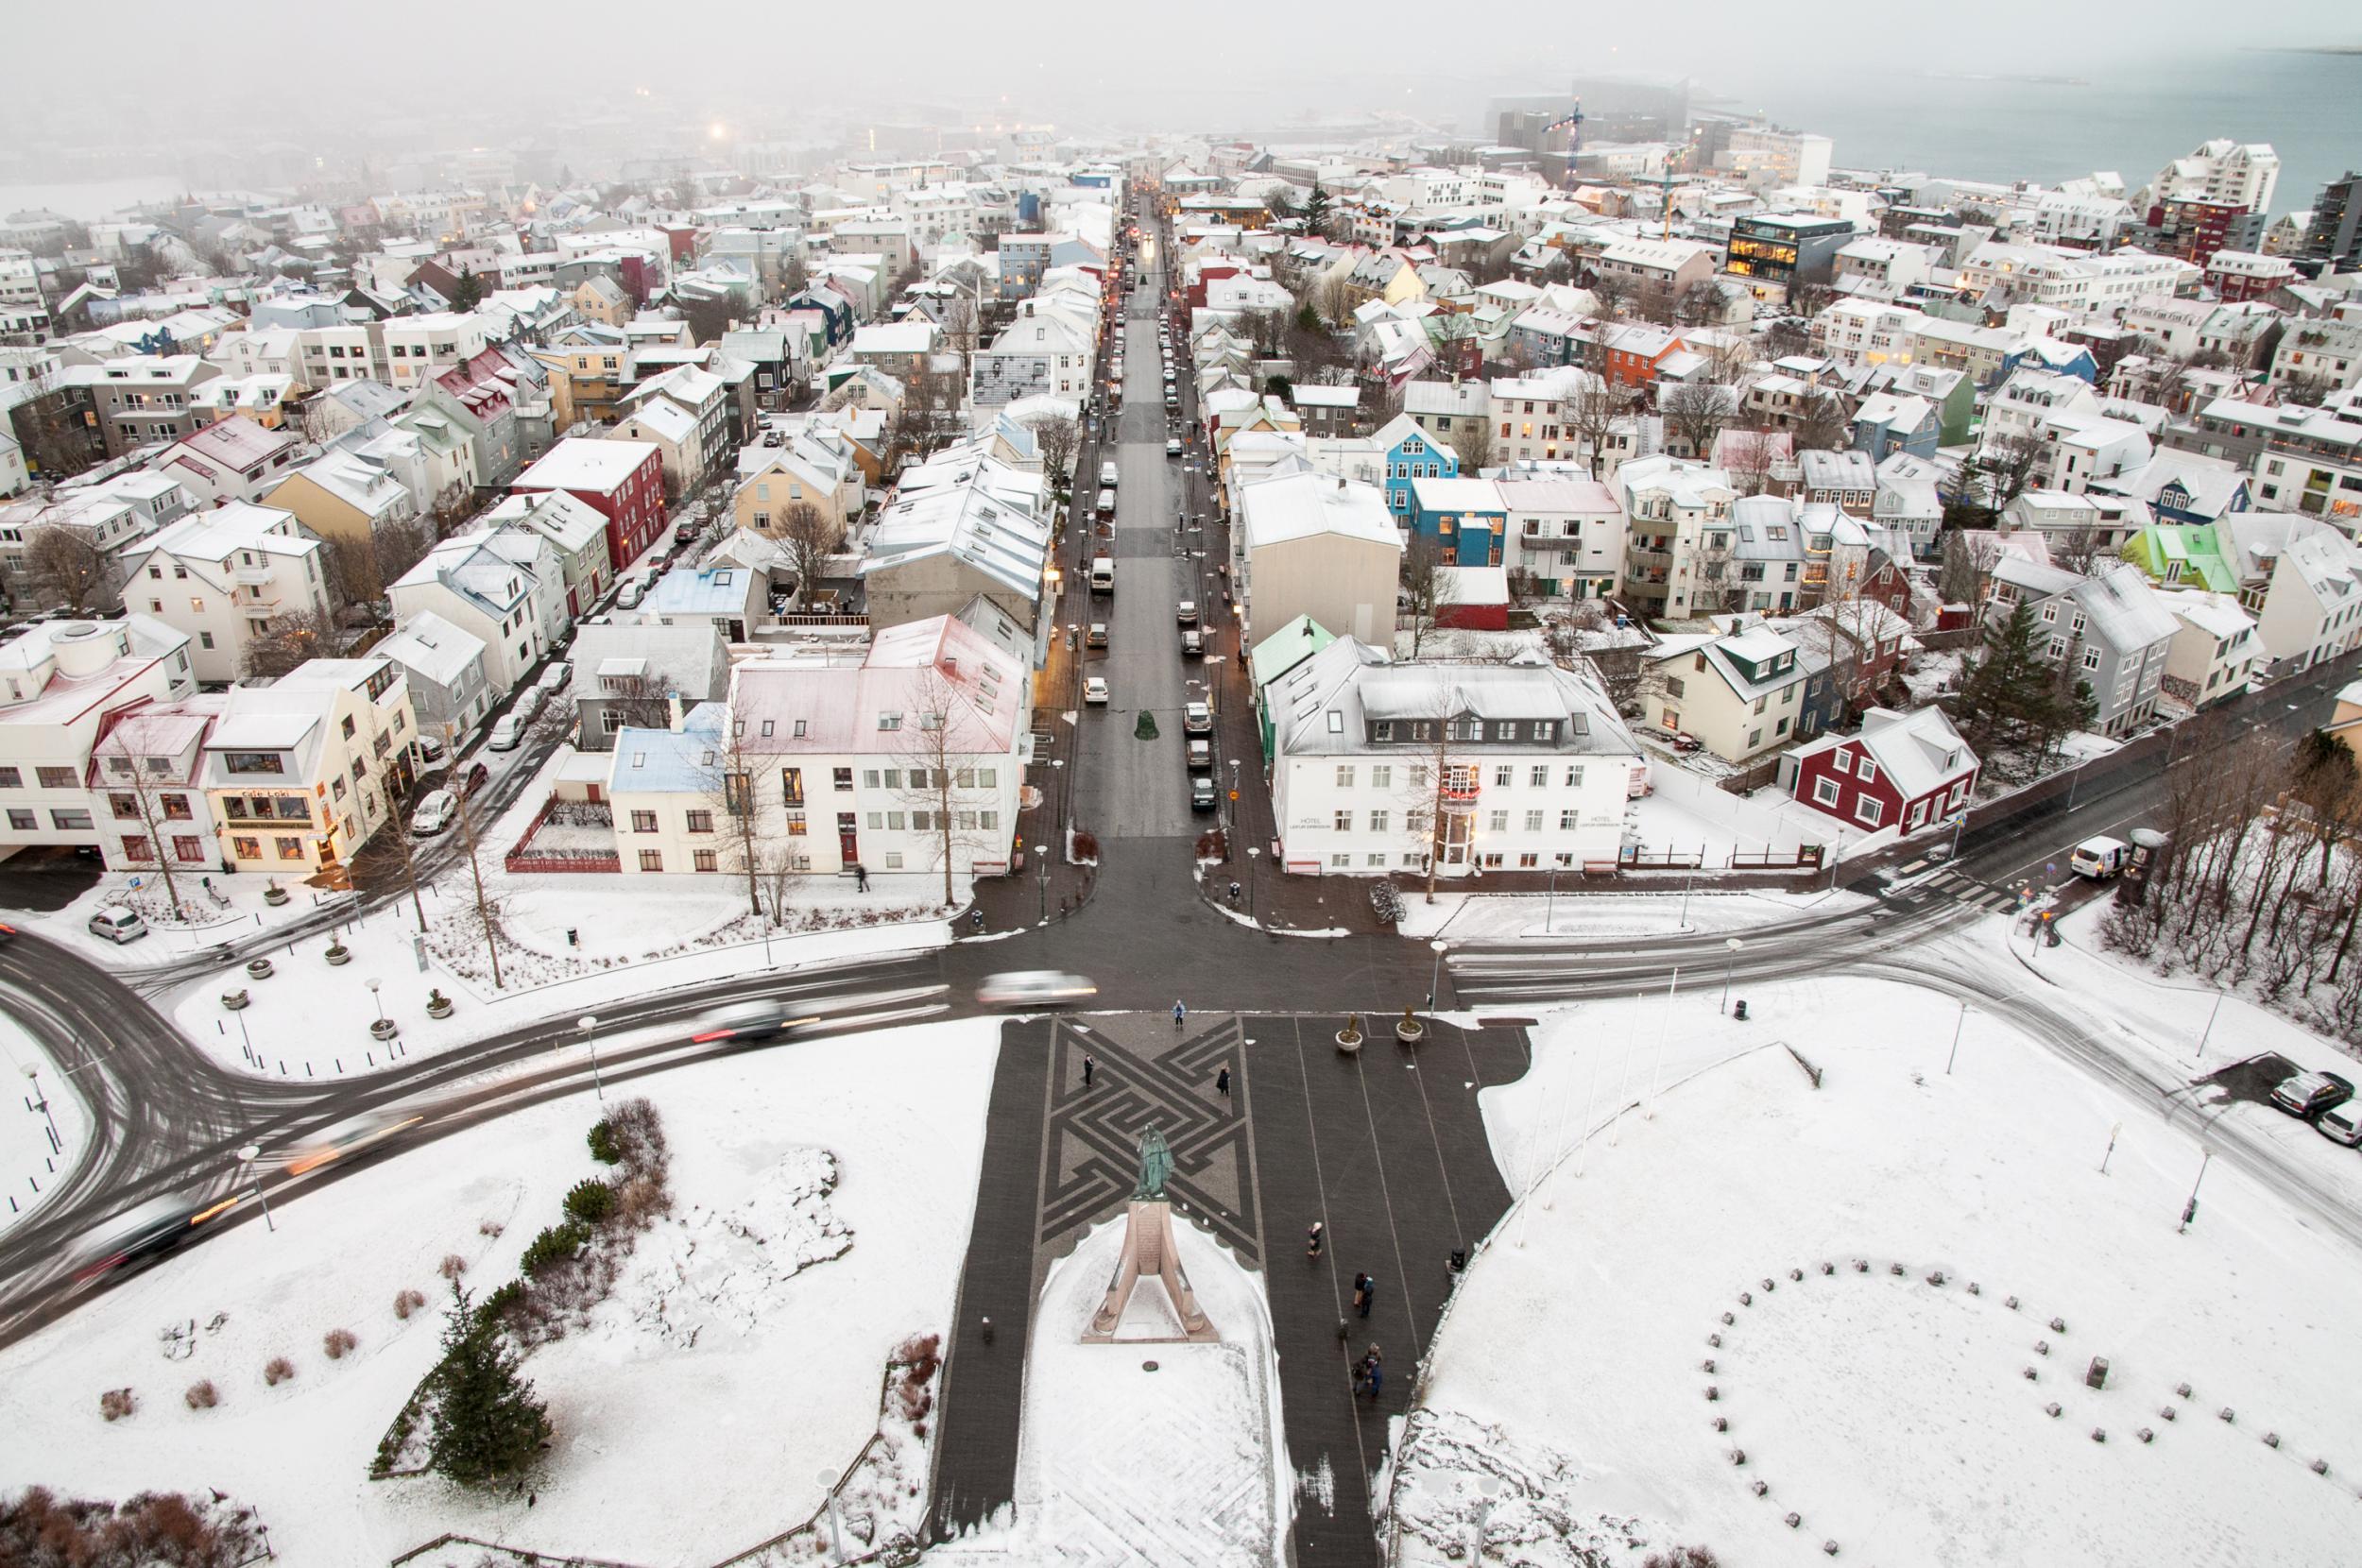 Reykjavik is still abuzz in the cooler months